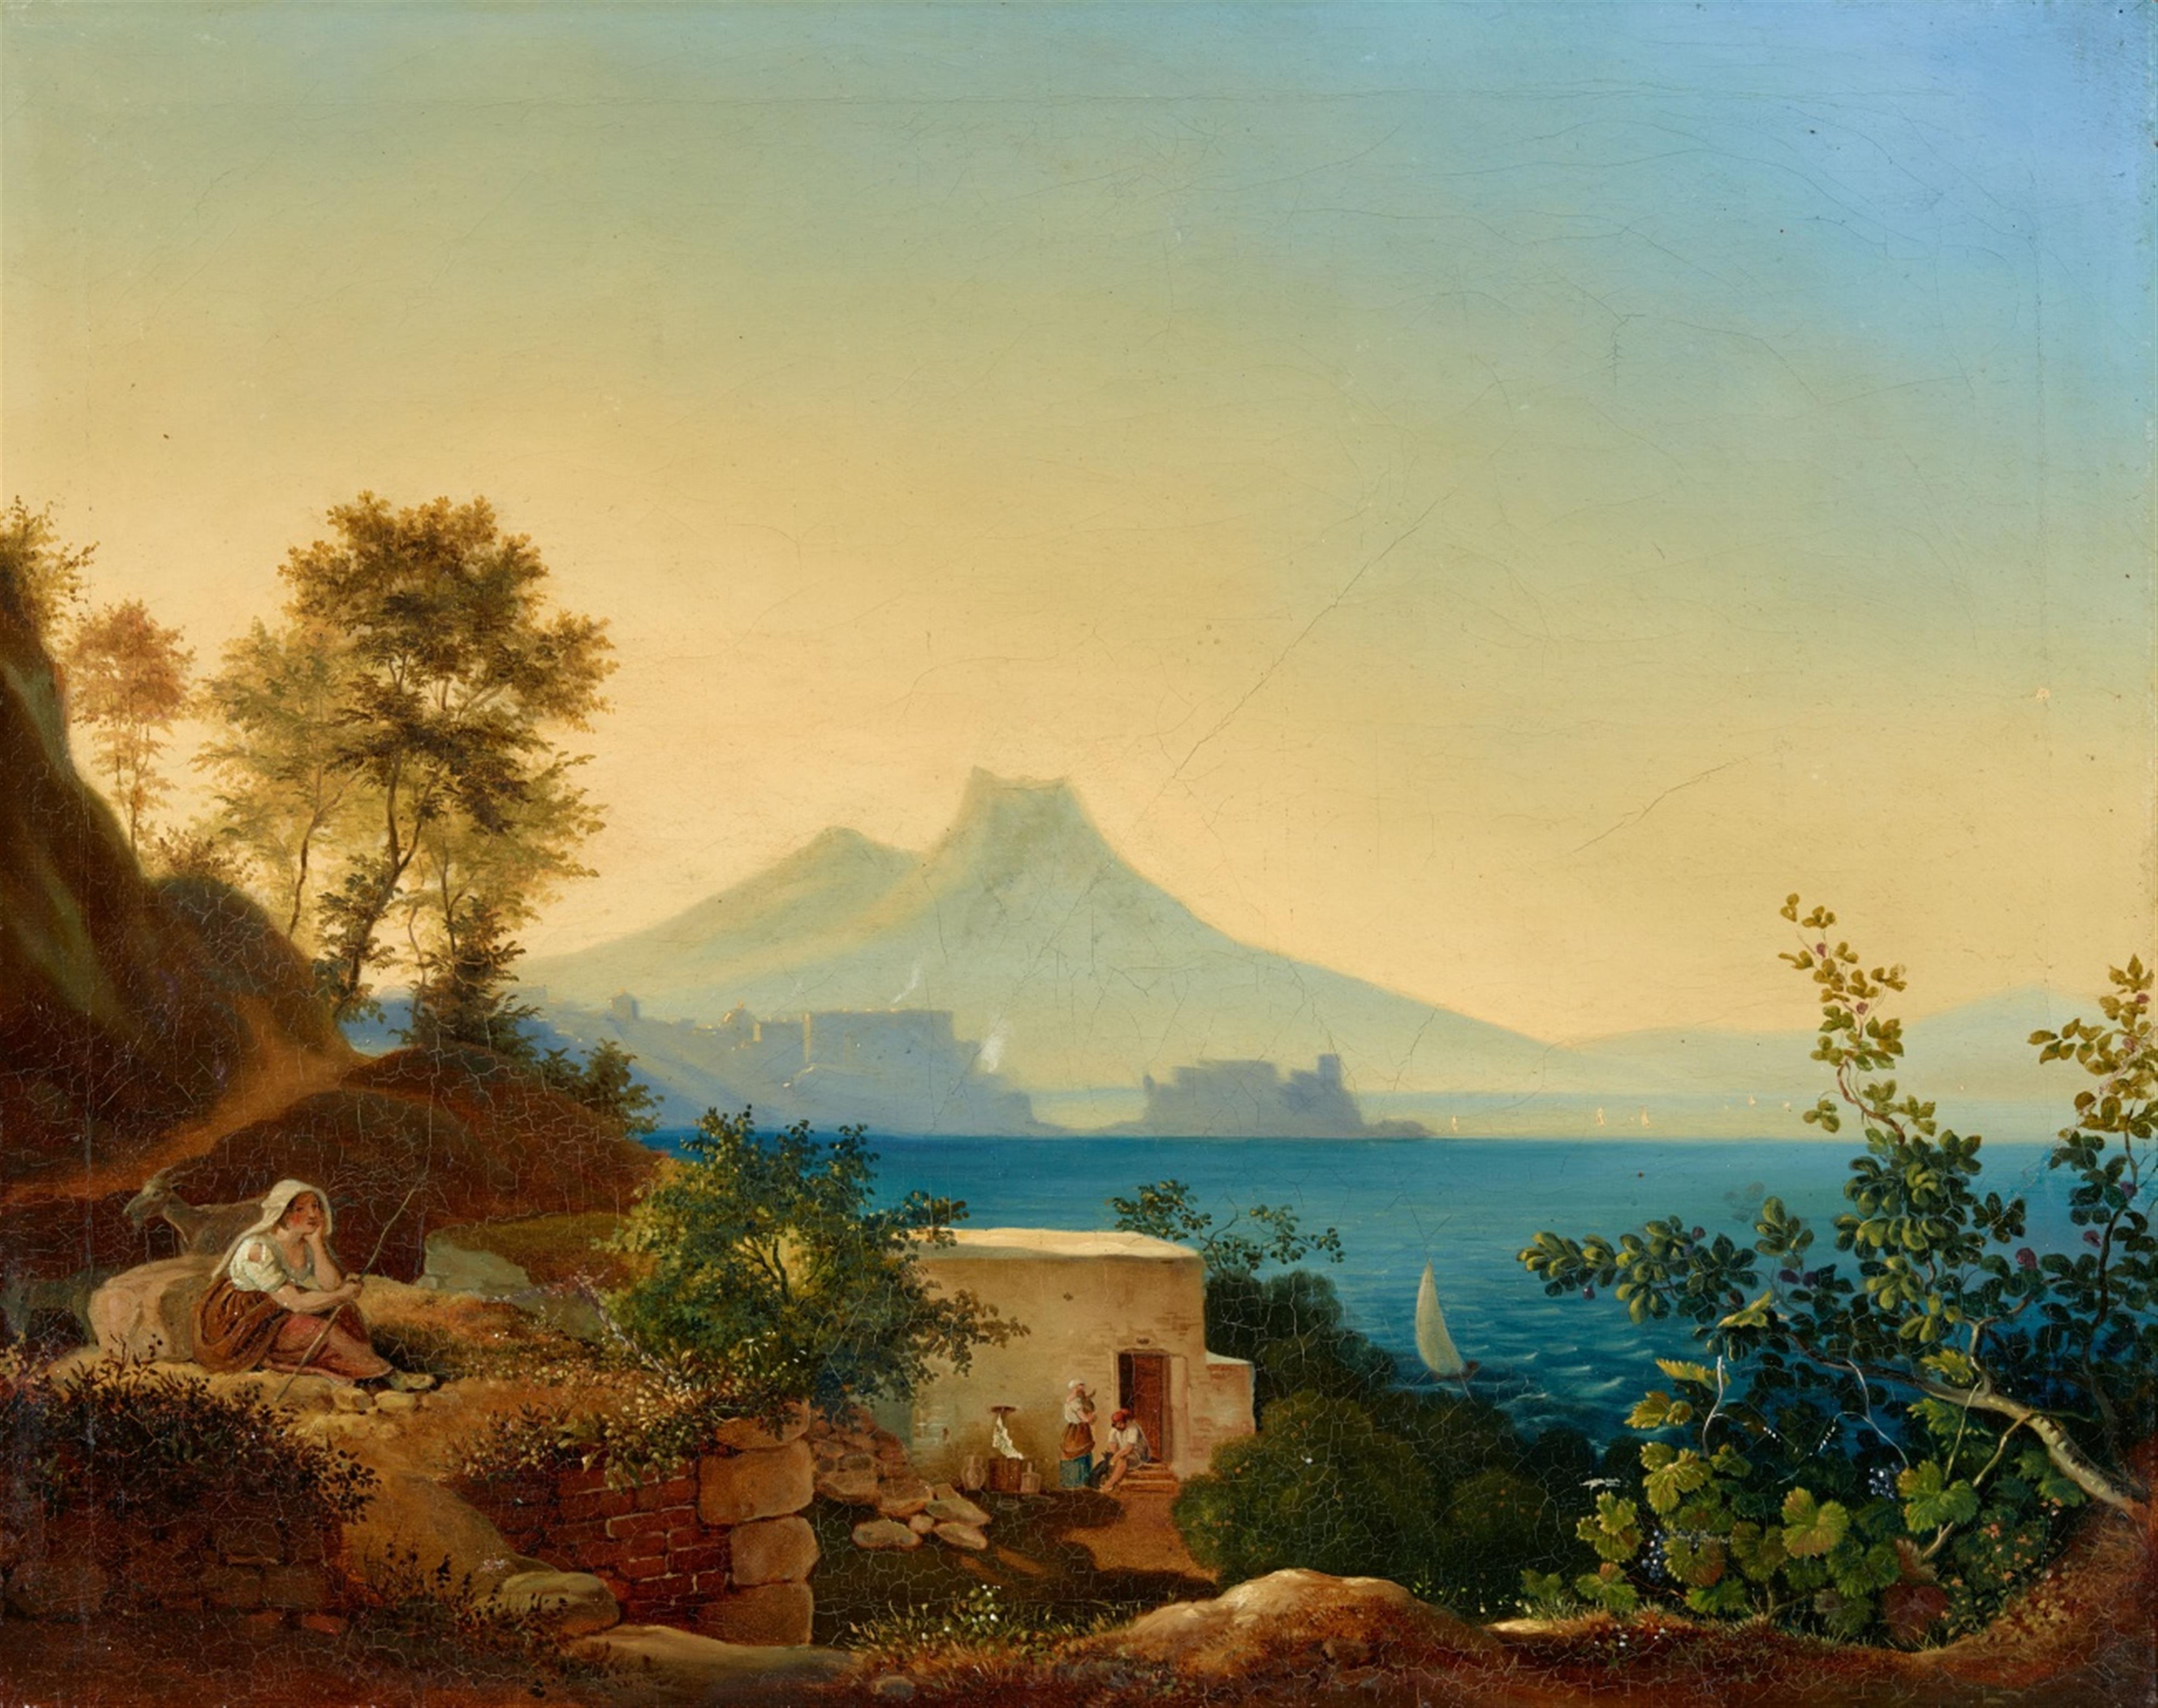 Ludwig Richter - The Bay of Naples with a View of the Castel dell'ovo and Vesuvius